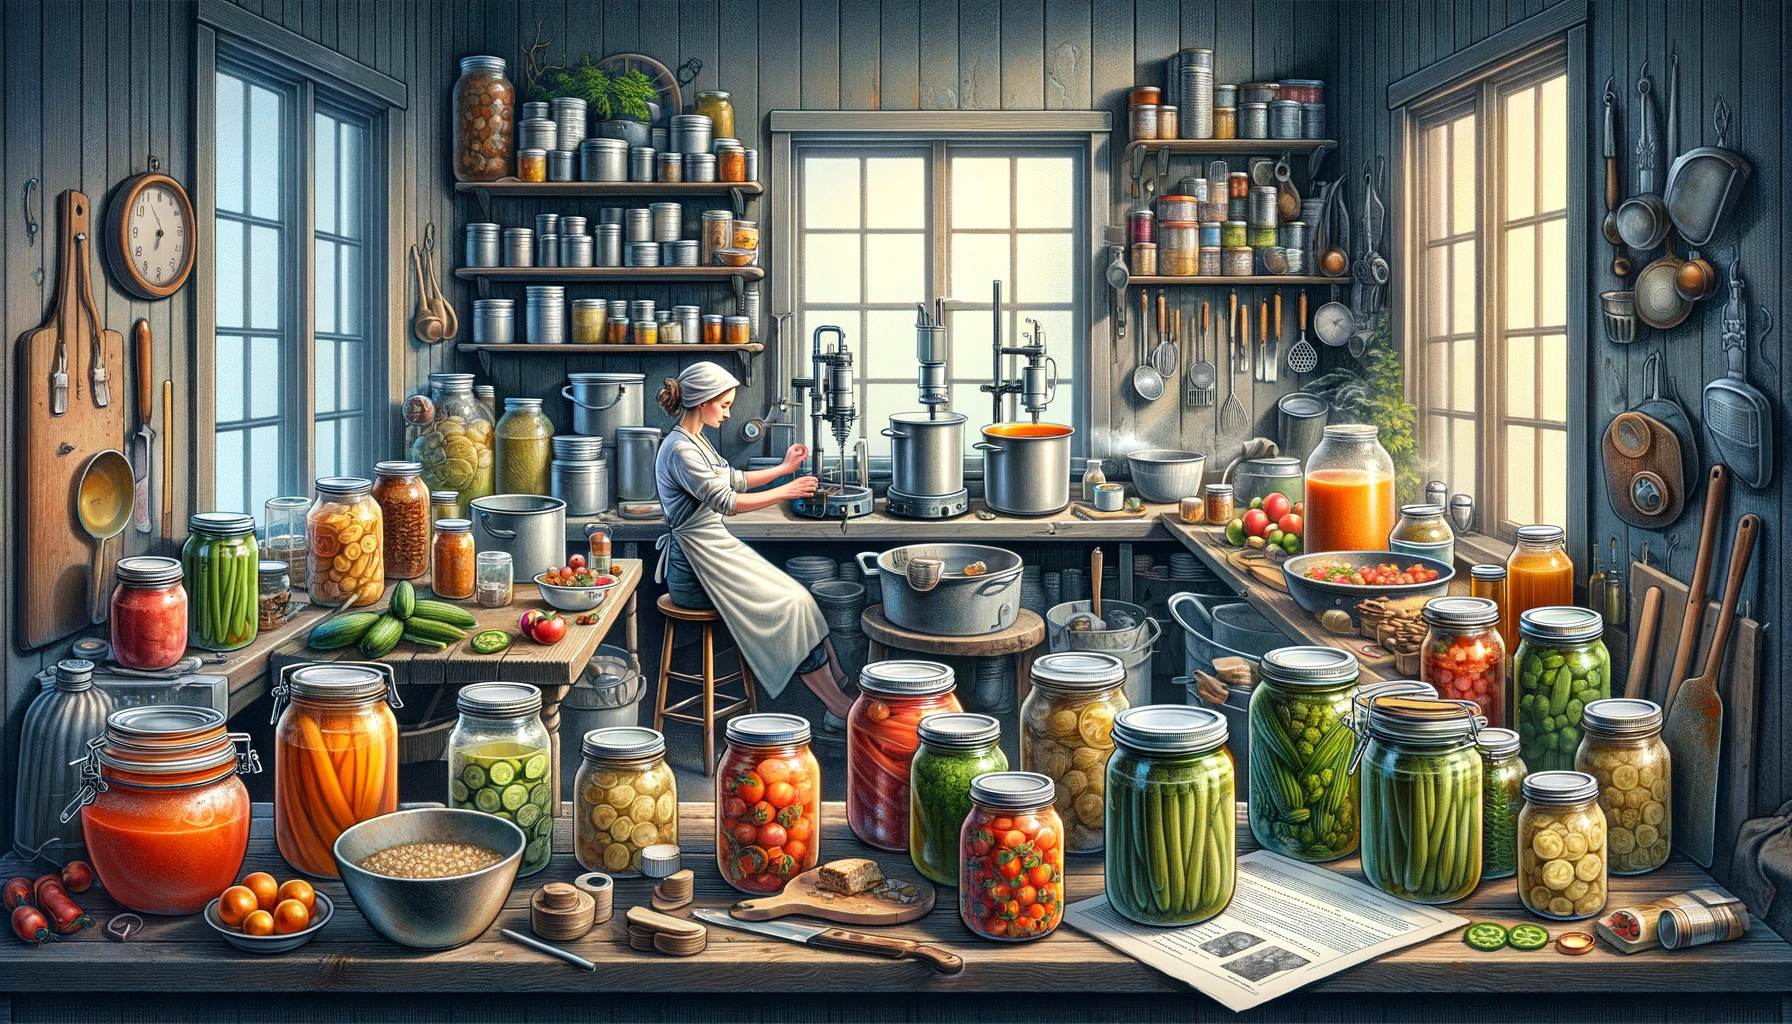 A detailed visual guide to the canning process in a kitchen, showing the sequential steps from food preparation to jar sealing, with a prepper demonstrating safety techniques and the use of various canning equipment, emphasizing the meticulous and satisfying journey of home food preservation